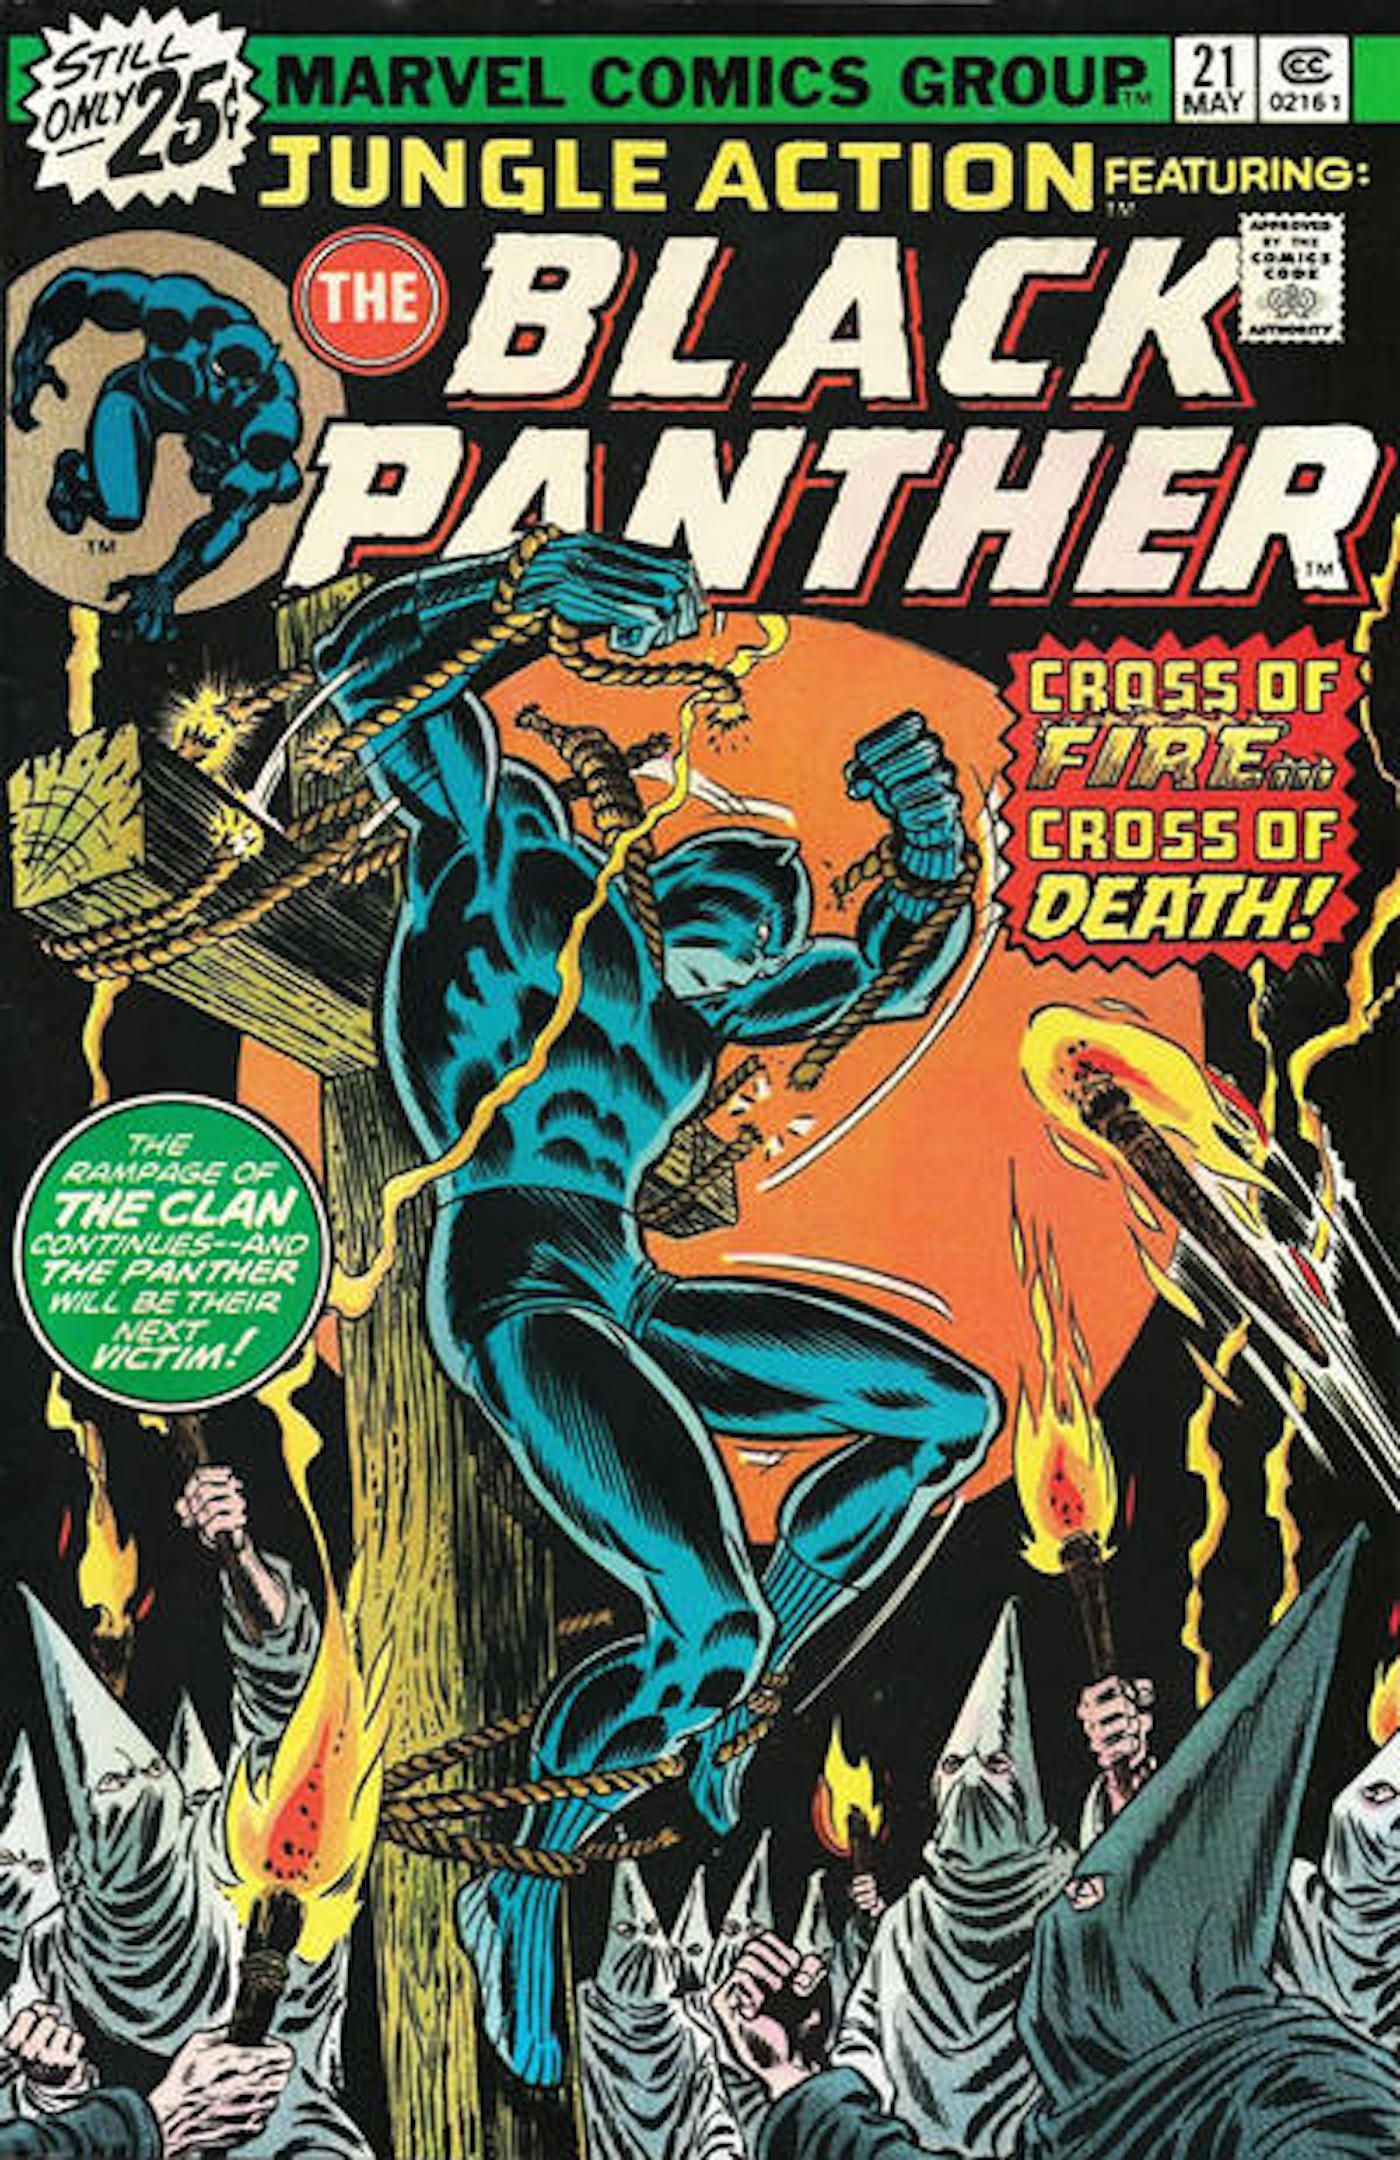 5. Black Panther 21 cross of fire